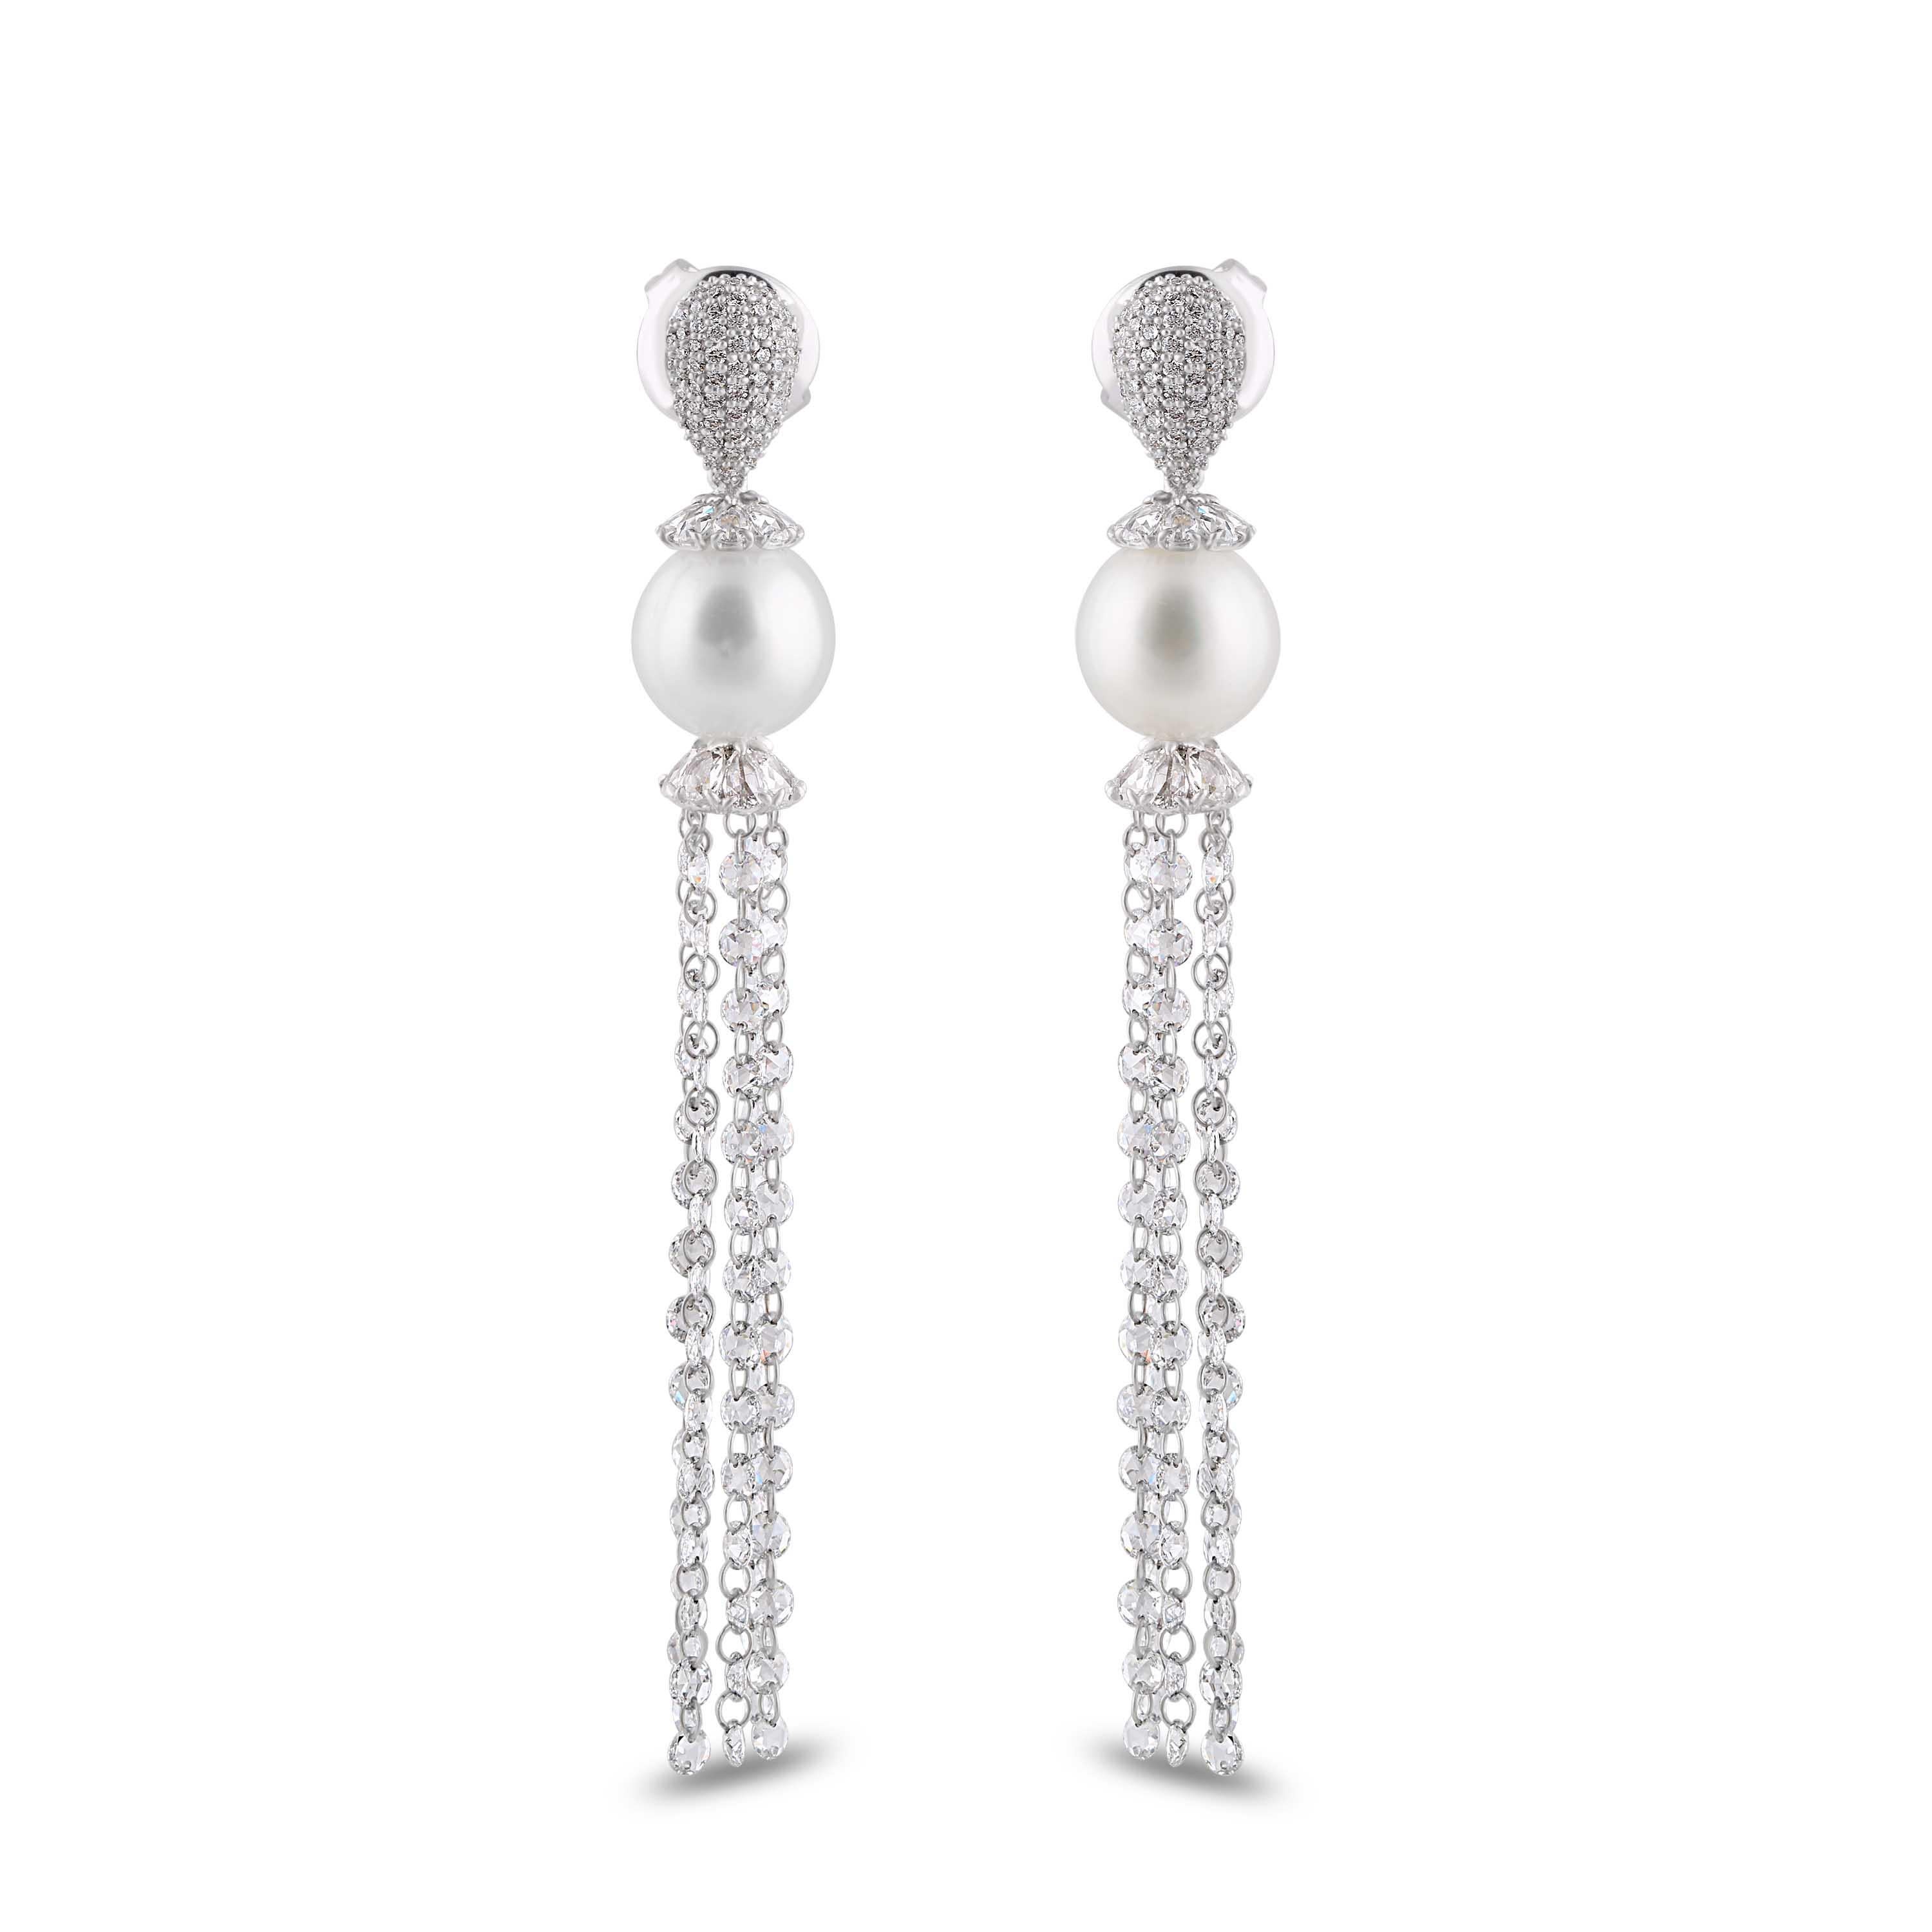 Studio Rêves Rose Cut Diamond and South Sea Pearls Dangling Earrings In New Condition For Sale In Mumbai, Maharashtra